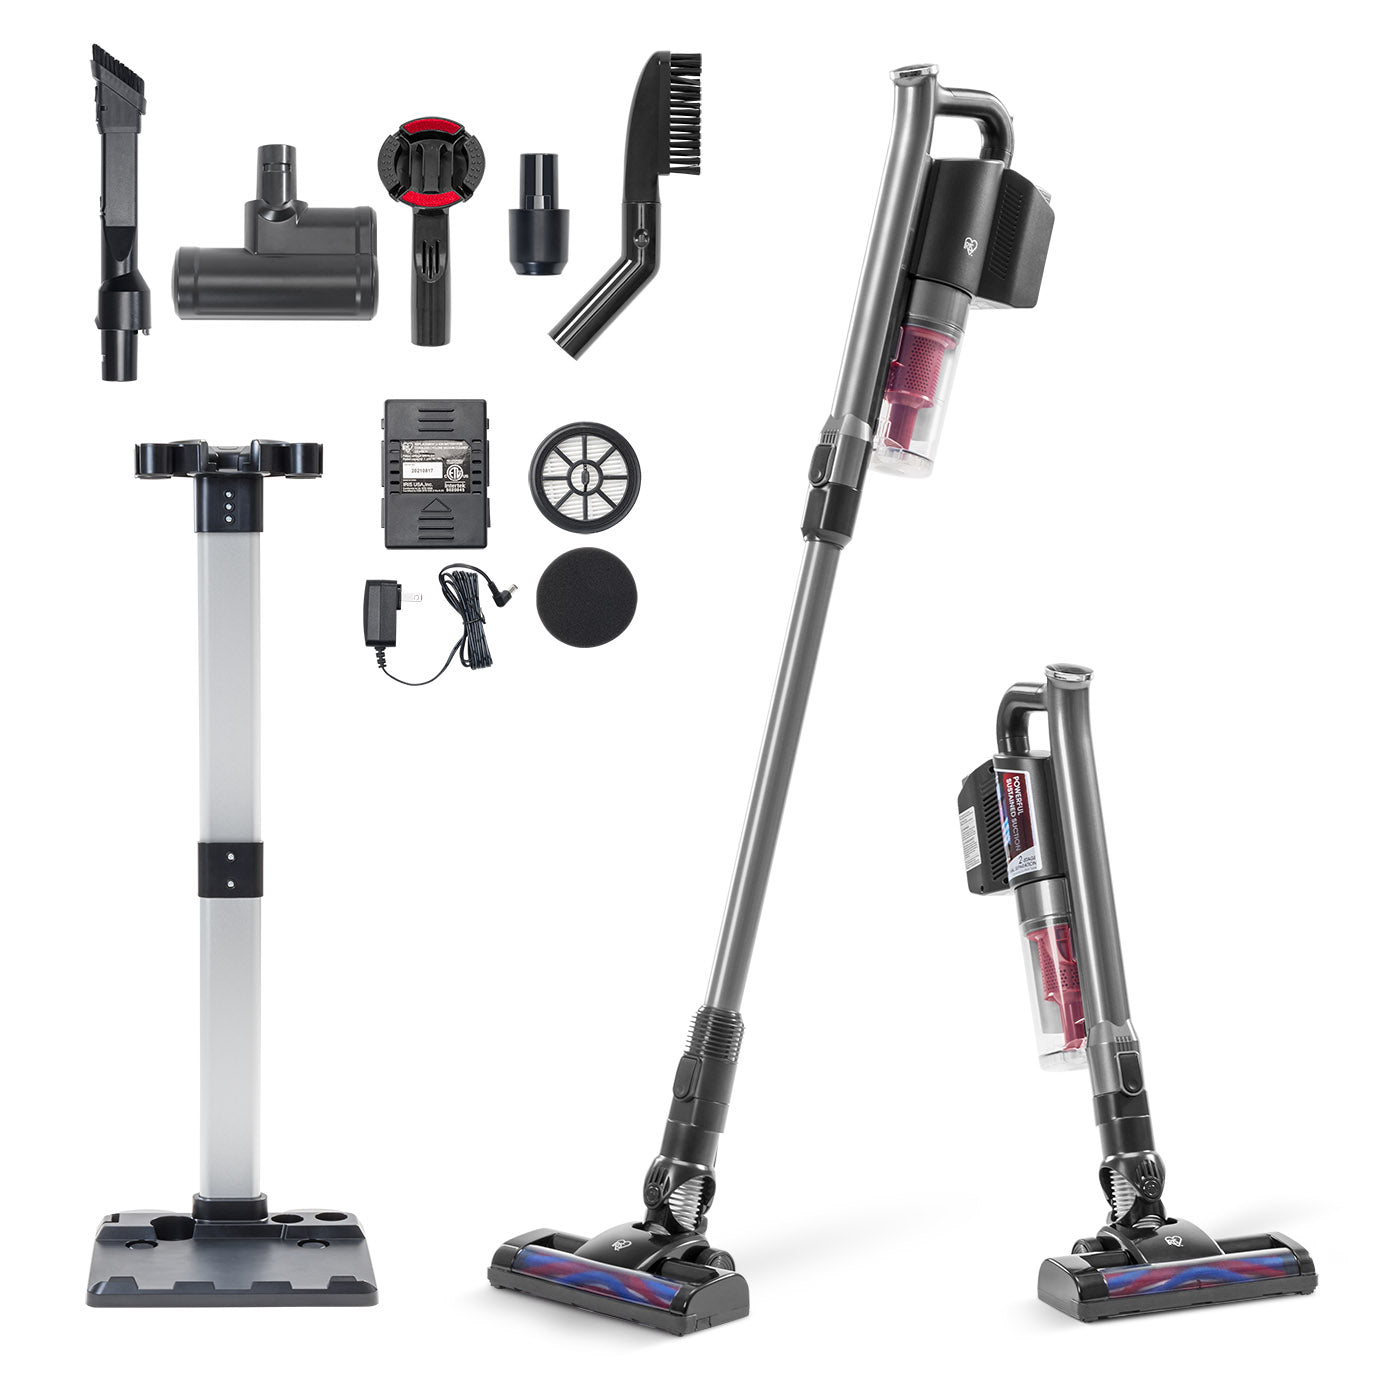 IRIS USA High Power Cordless Stick Vacuum Cleaner with Replaceable